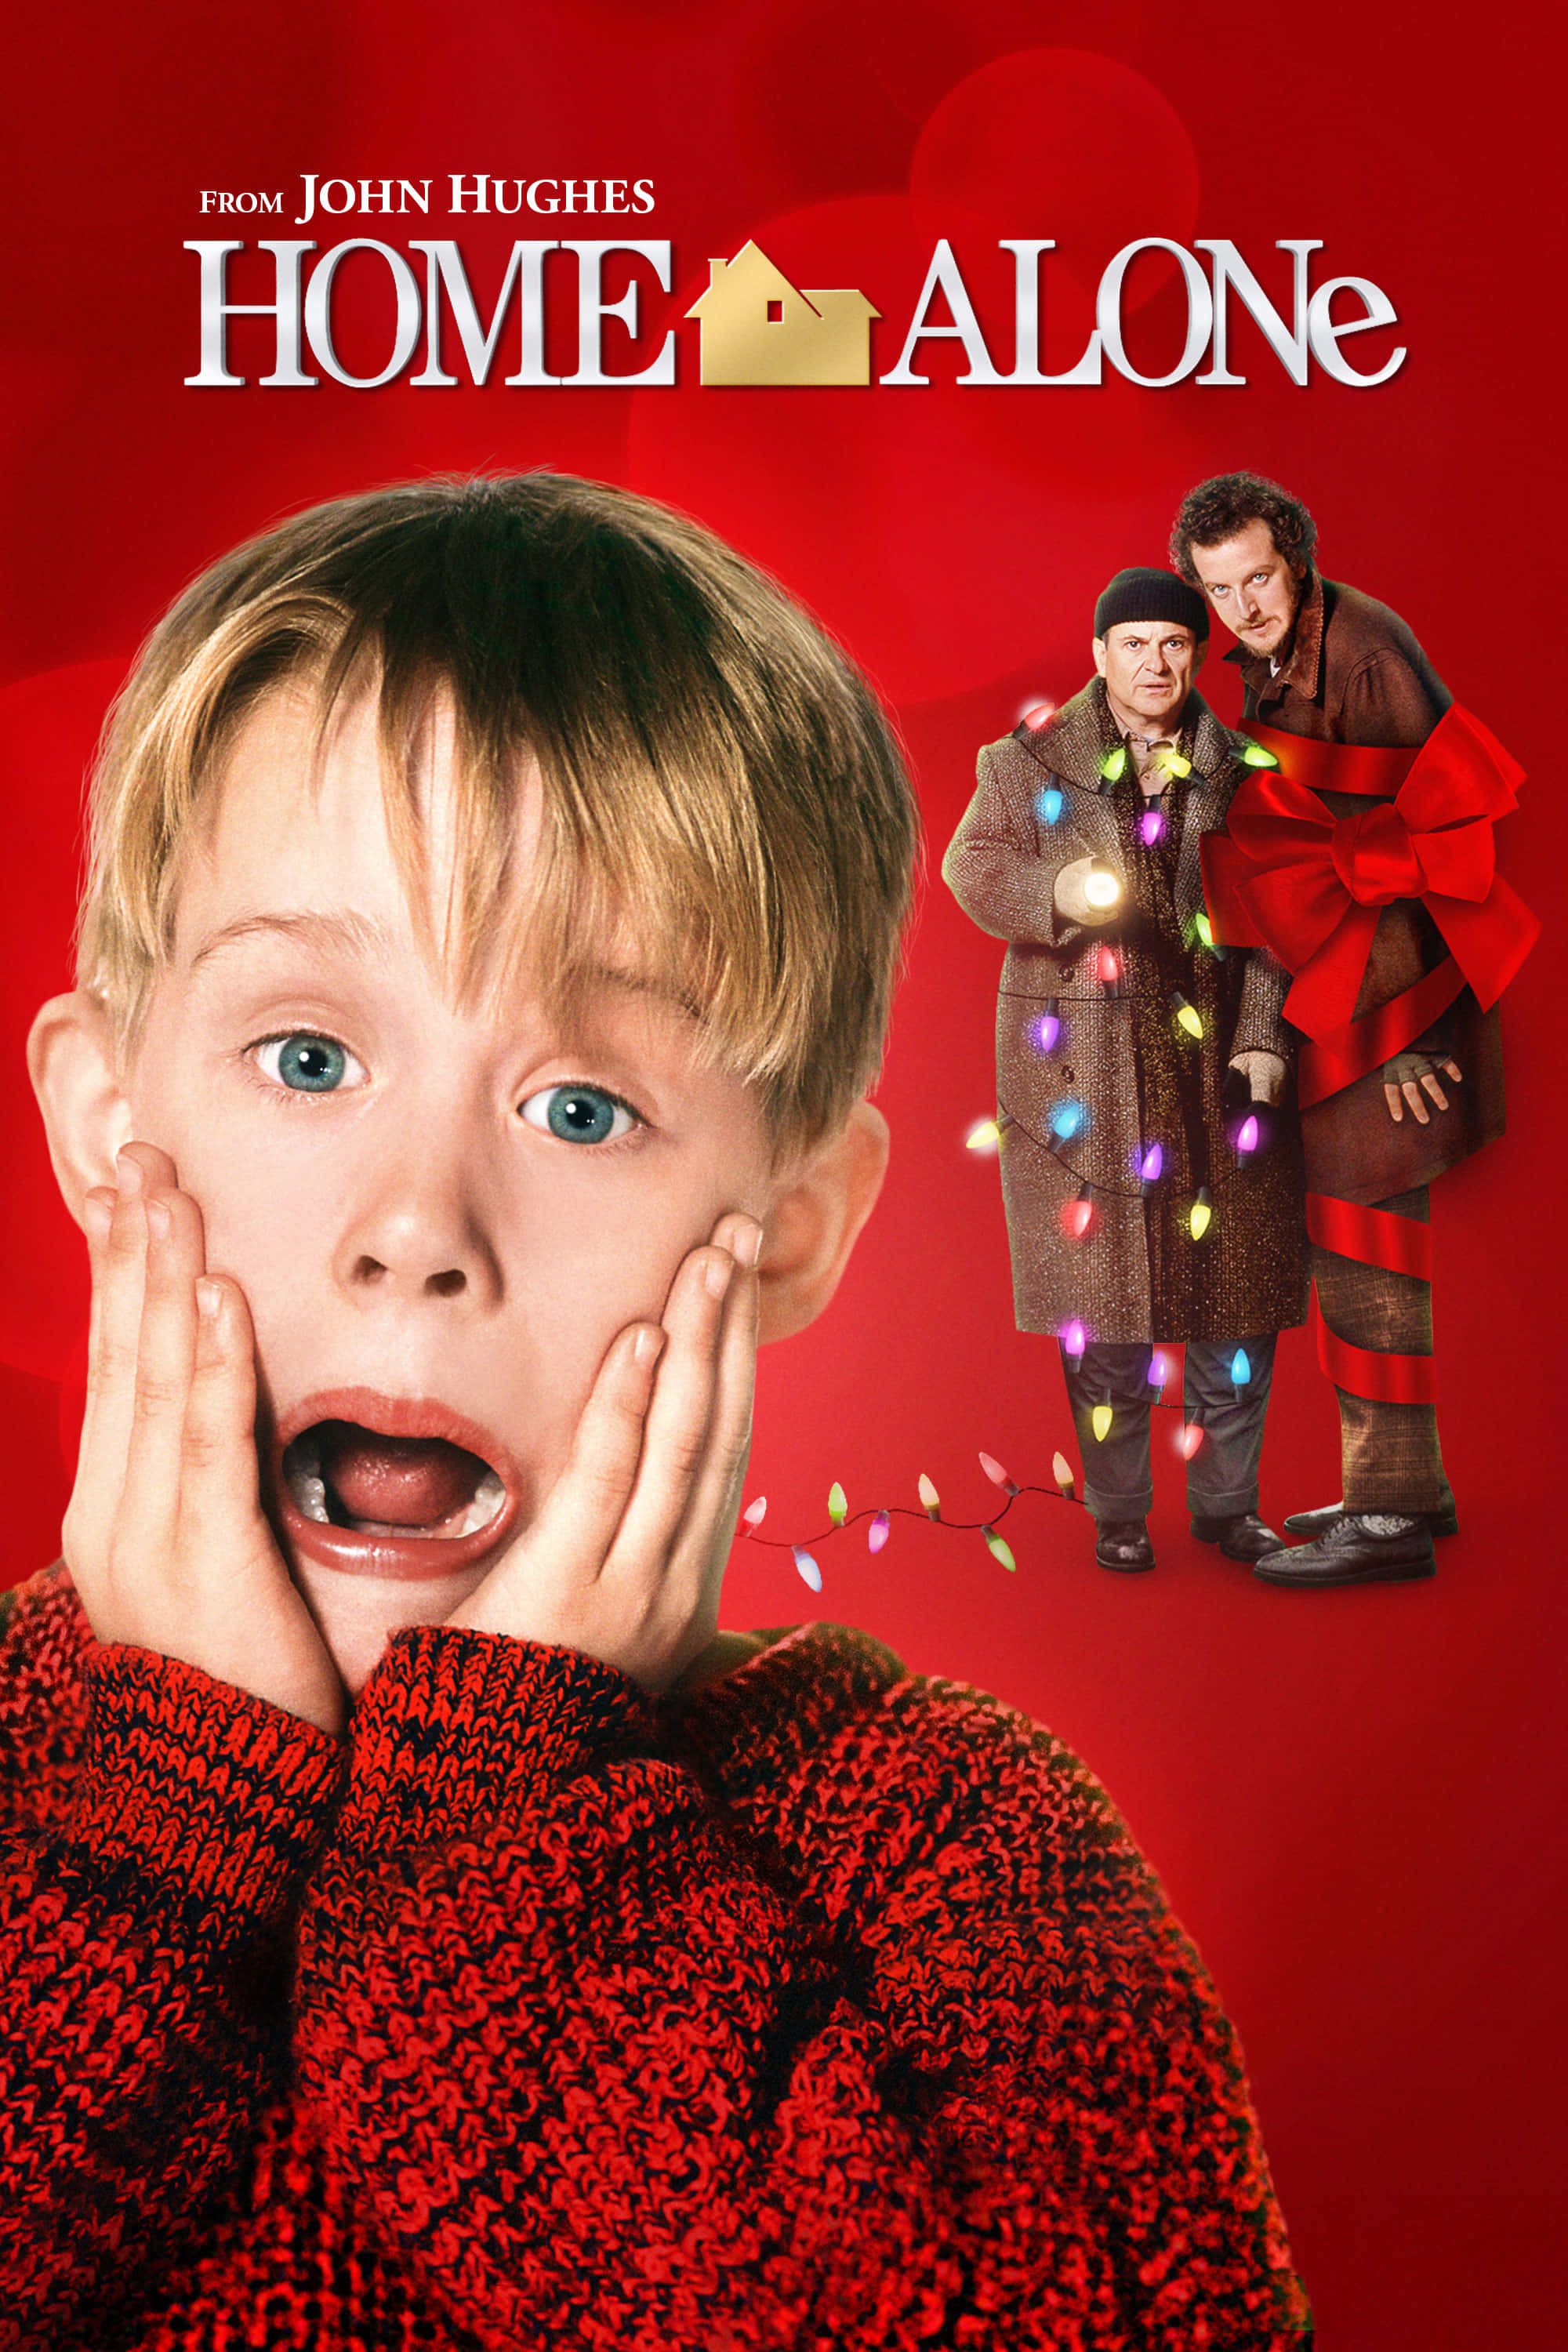 Kevin McAllister outsmarts burglars in Home Alone